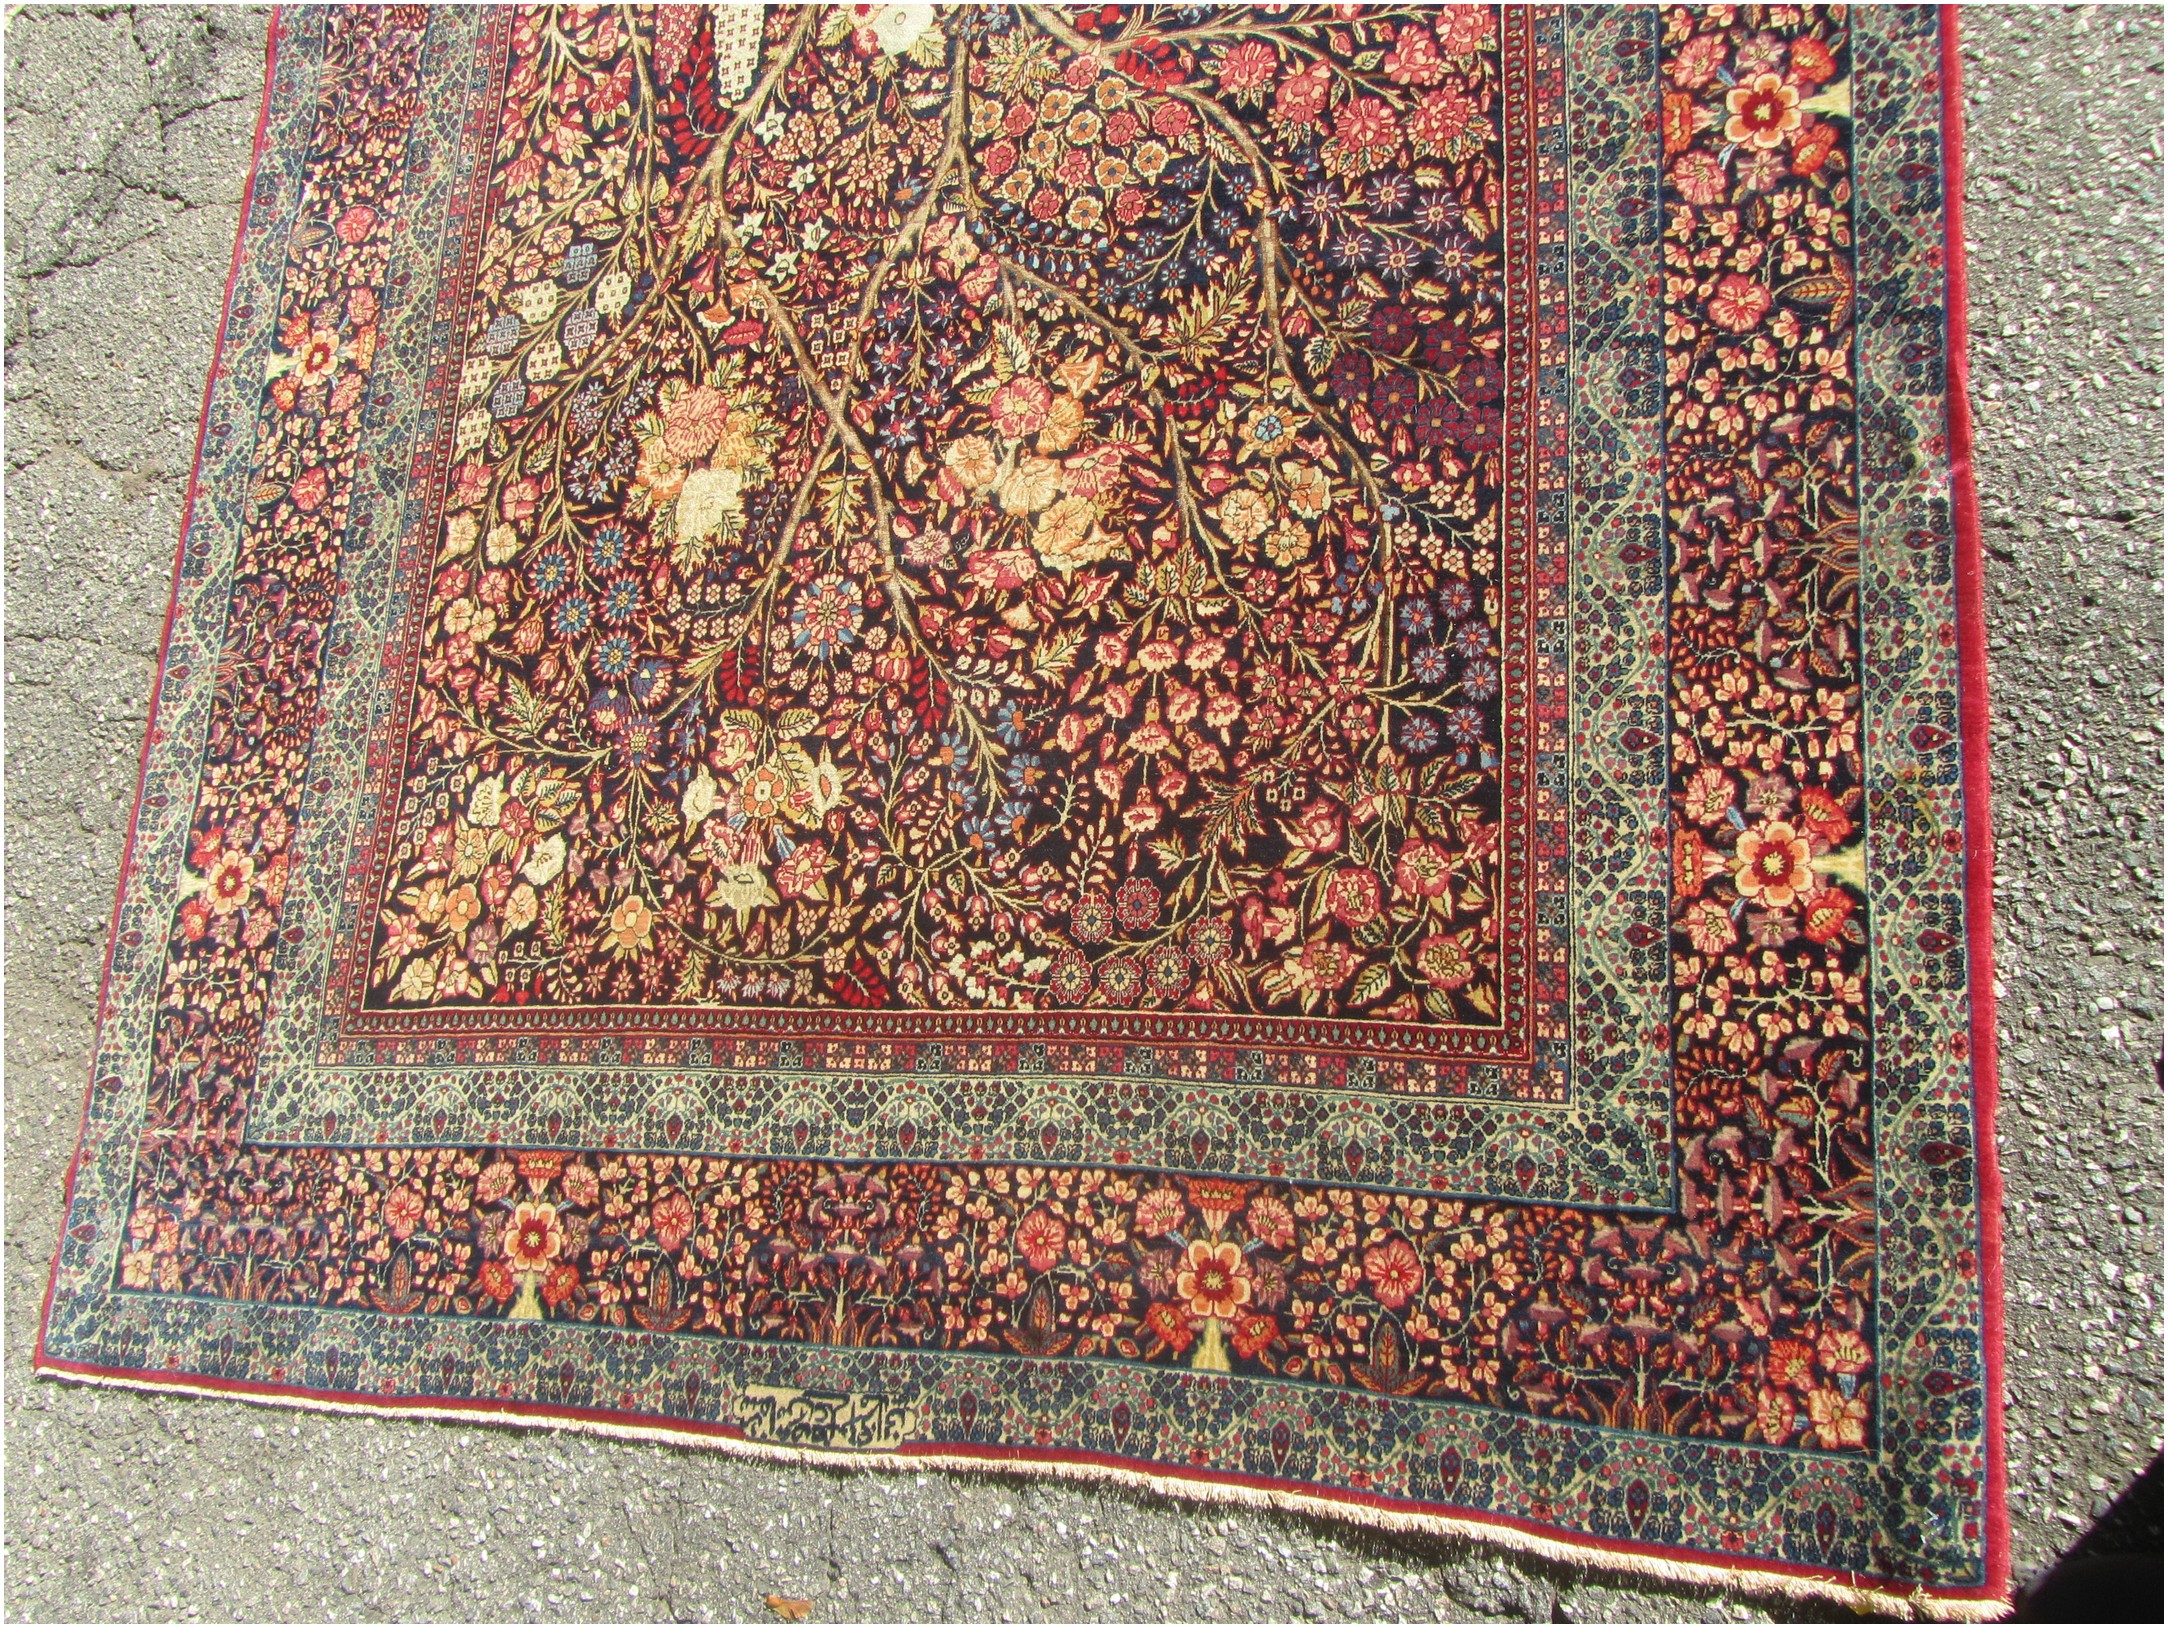 This is an antique hand-woven rug.